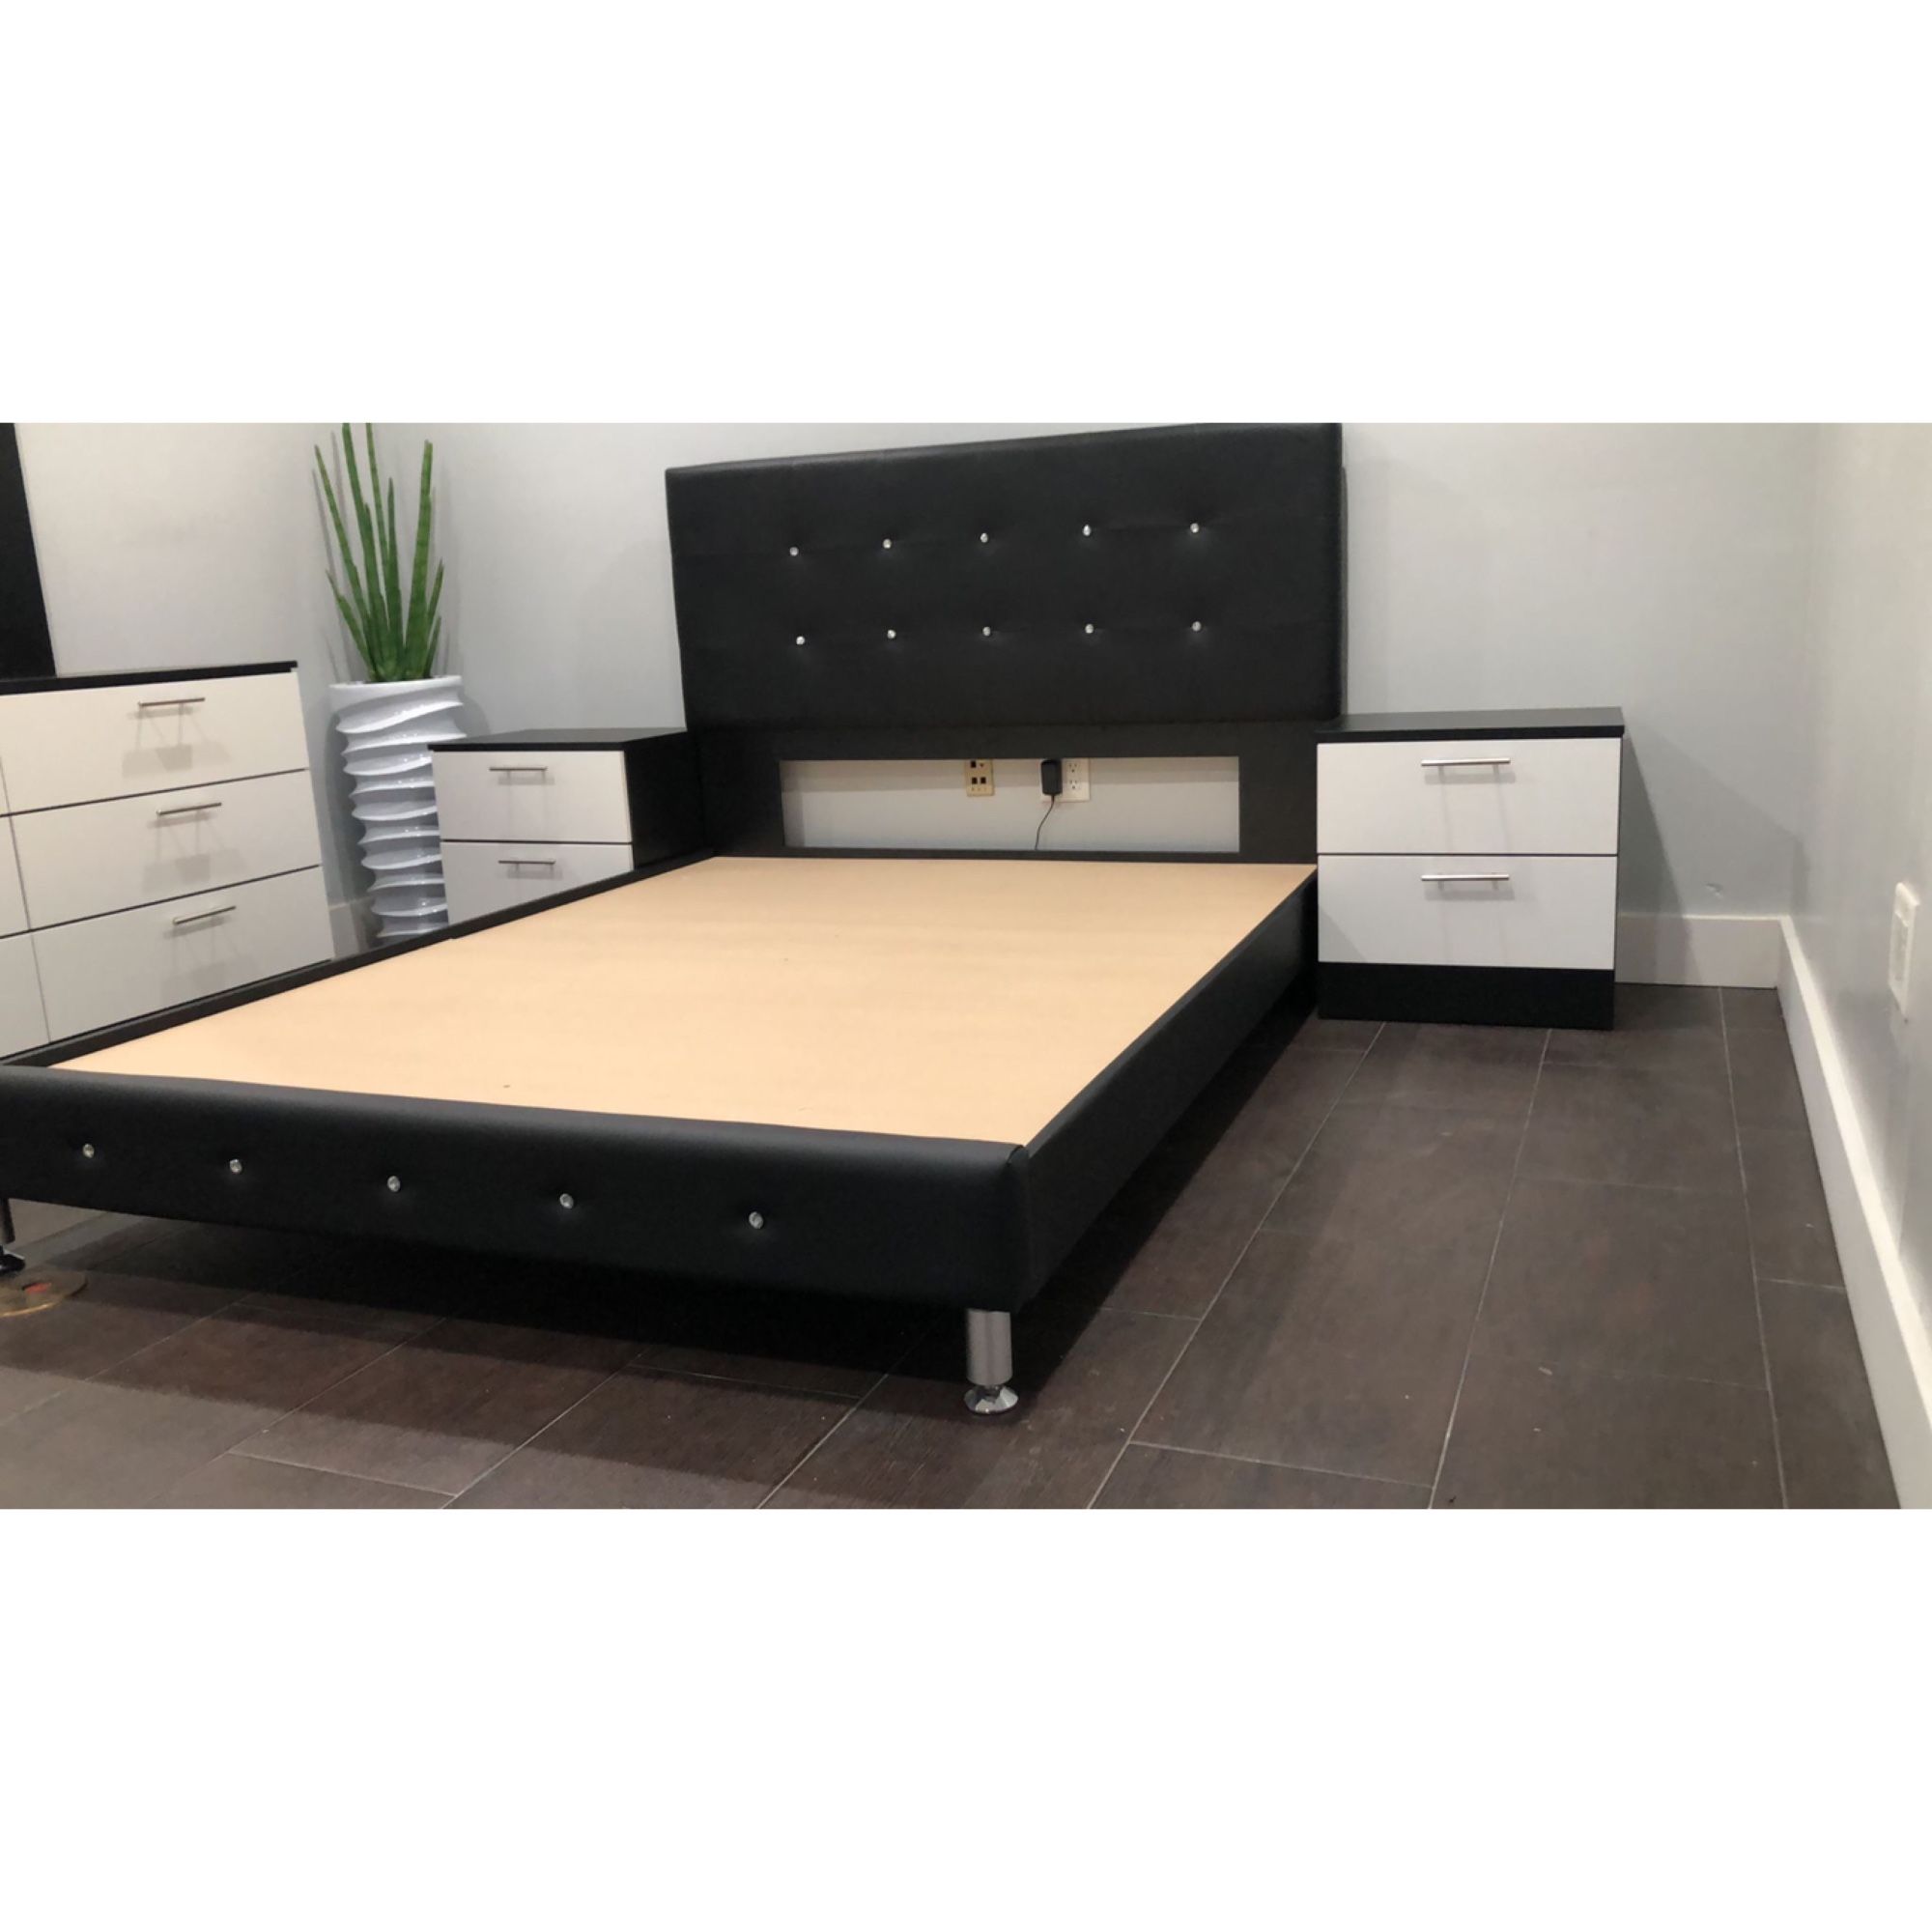 New Queen Bed Frame Dresser And Nightstands Mattress Is Not Included 